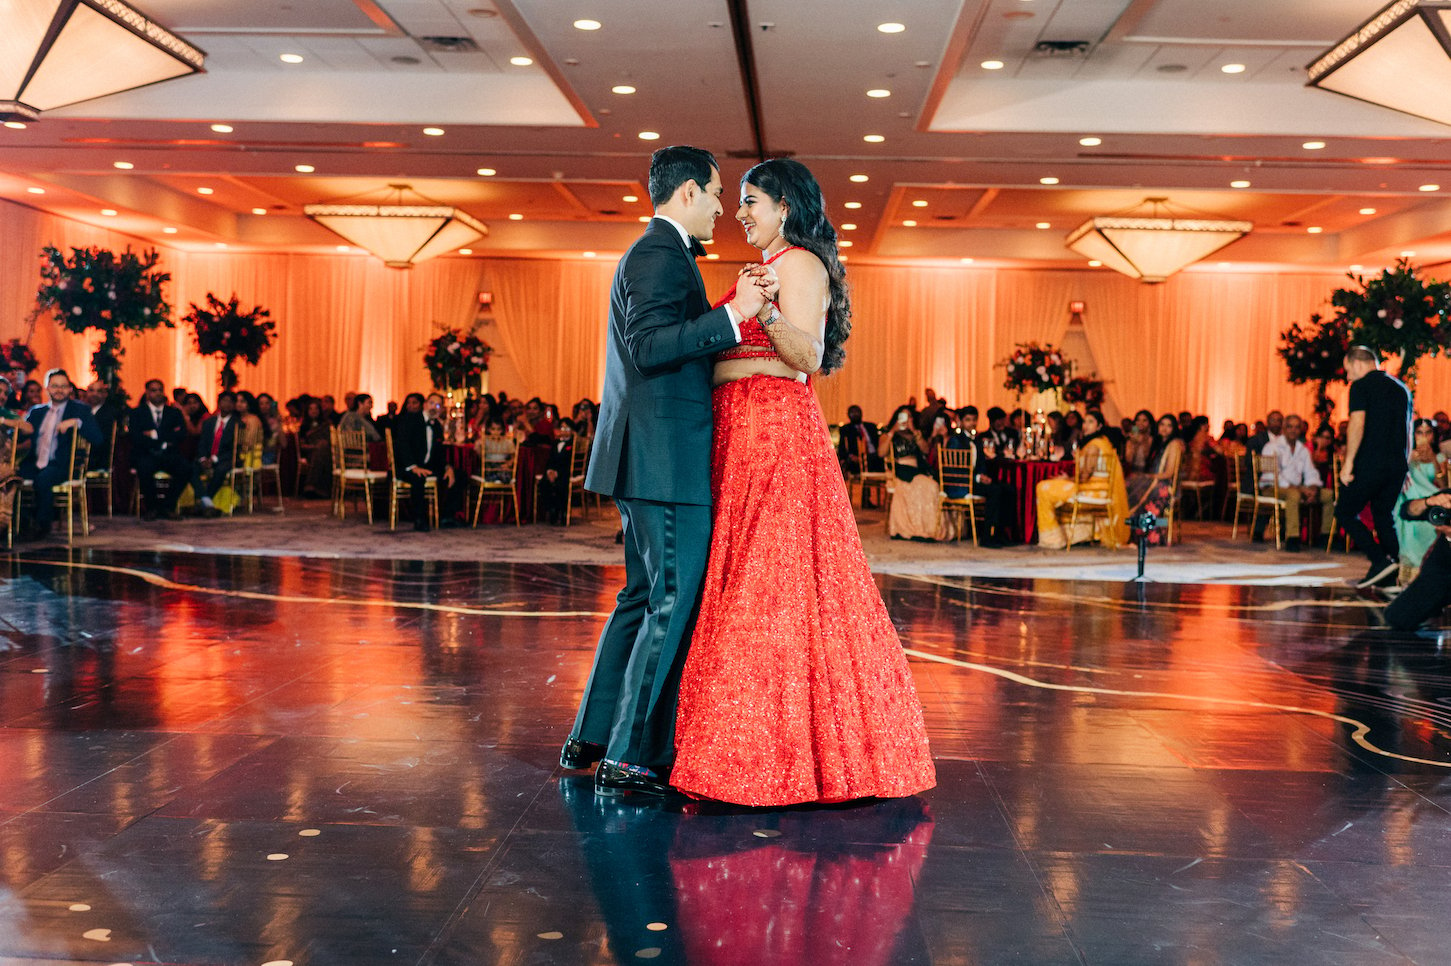 The Design for This Orange-and-Red October Wedding Was Inspired by Fall